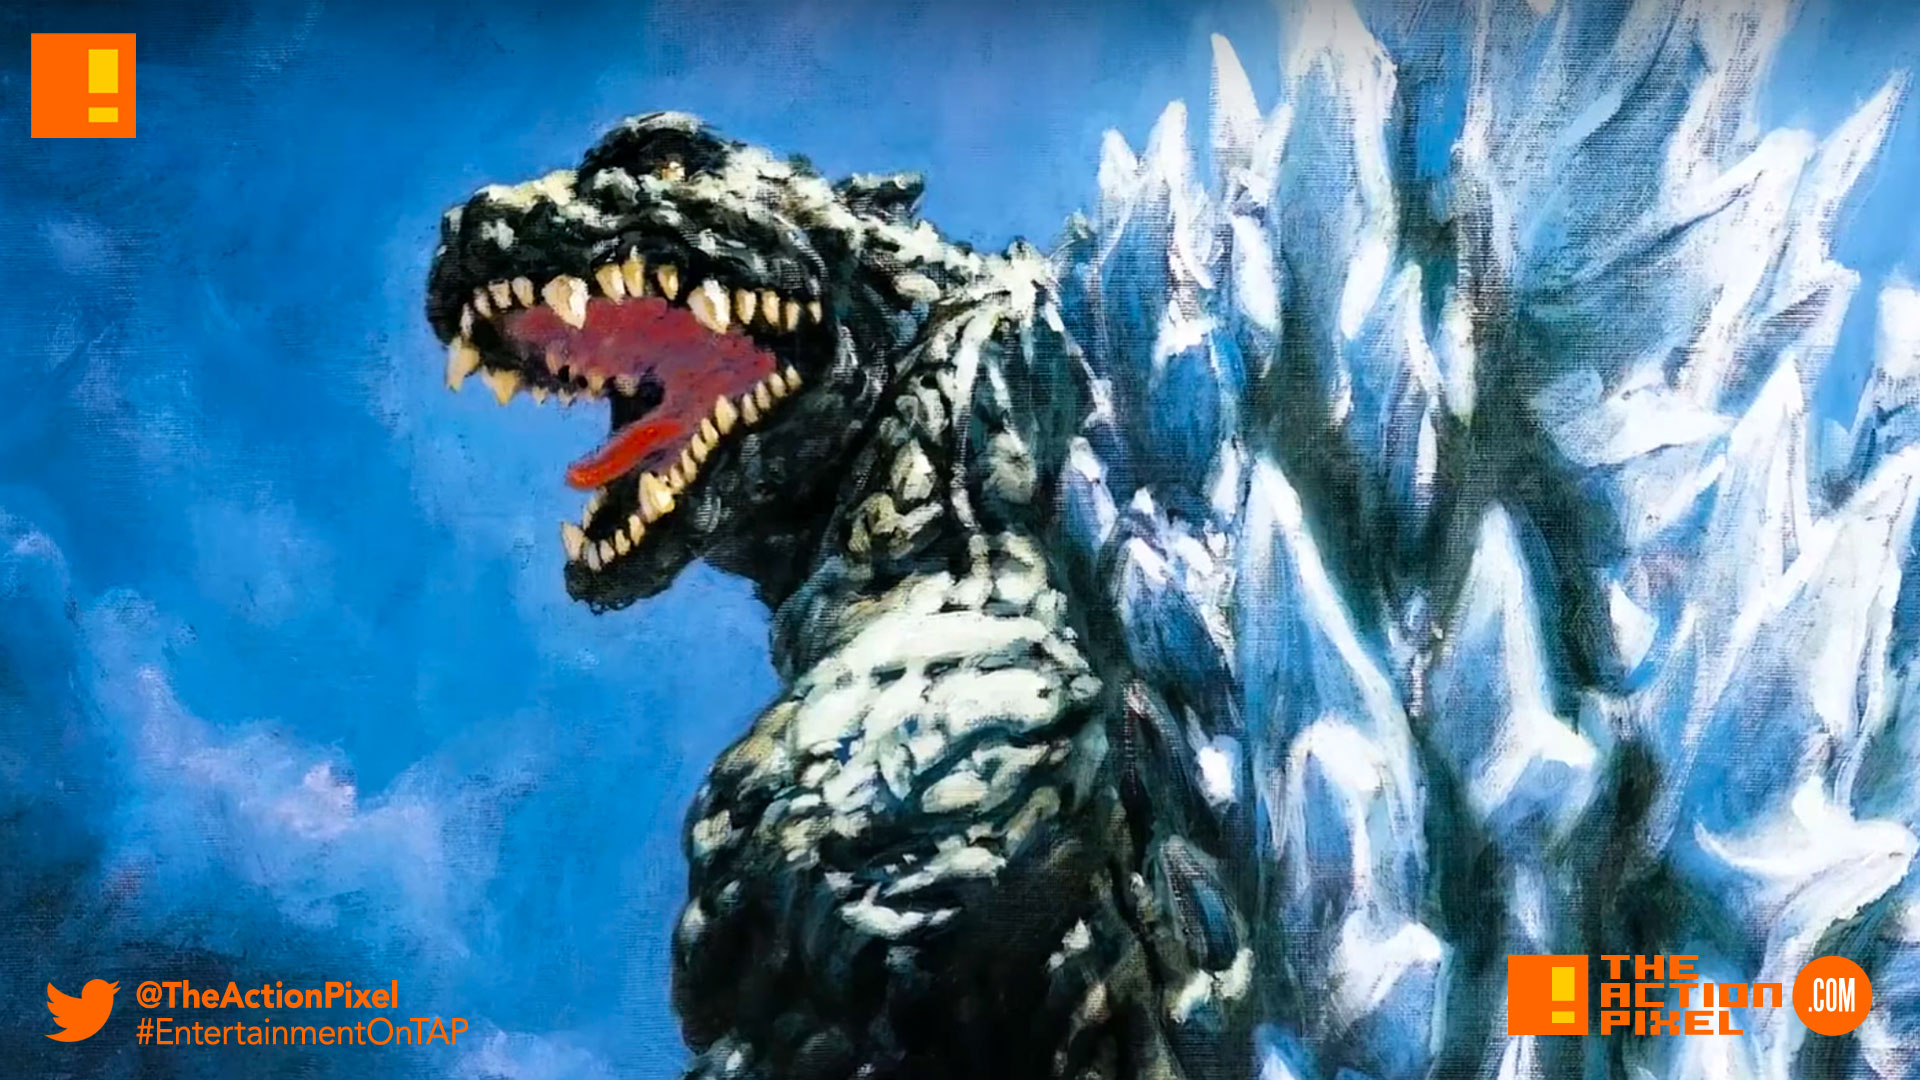 godzilla: monster planet, godzilla, monster planet, the action pixel, entertainment on tap,